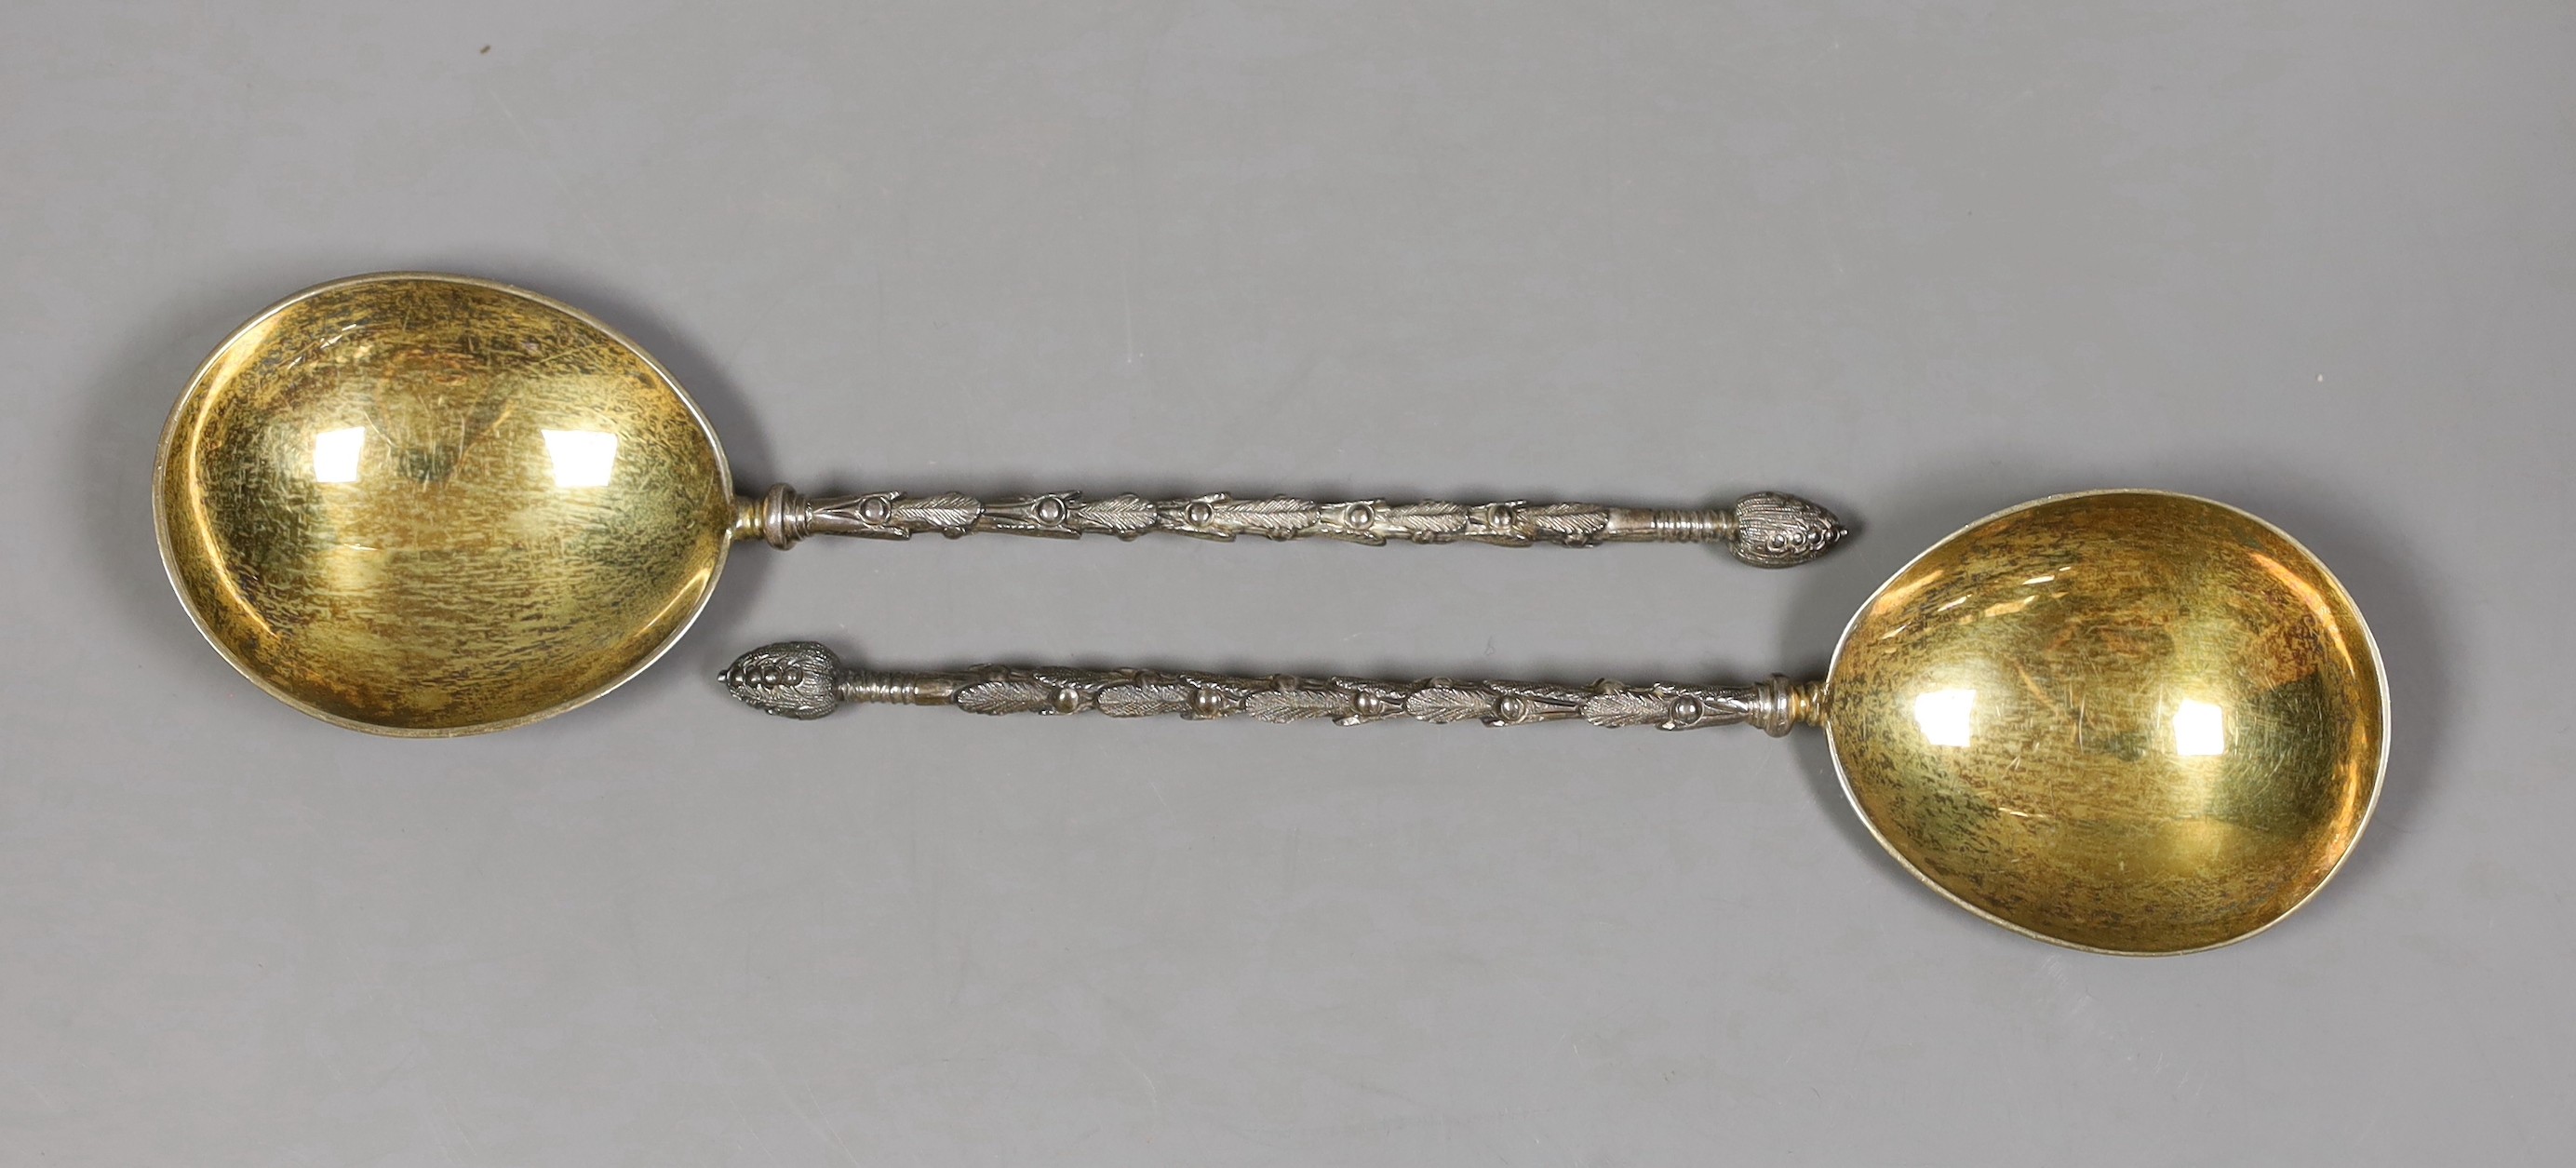 A pair of George V silver serving spoons, with ornate stems, Mappin & Webb, London, 1918/19, 19.6cm, 120 grams.                                                                                                             